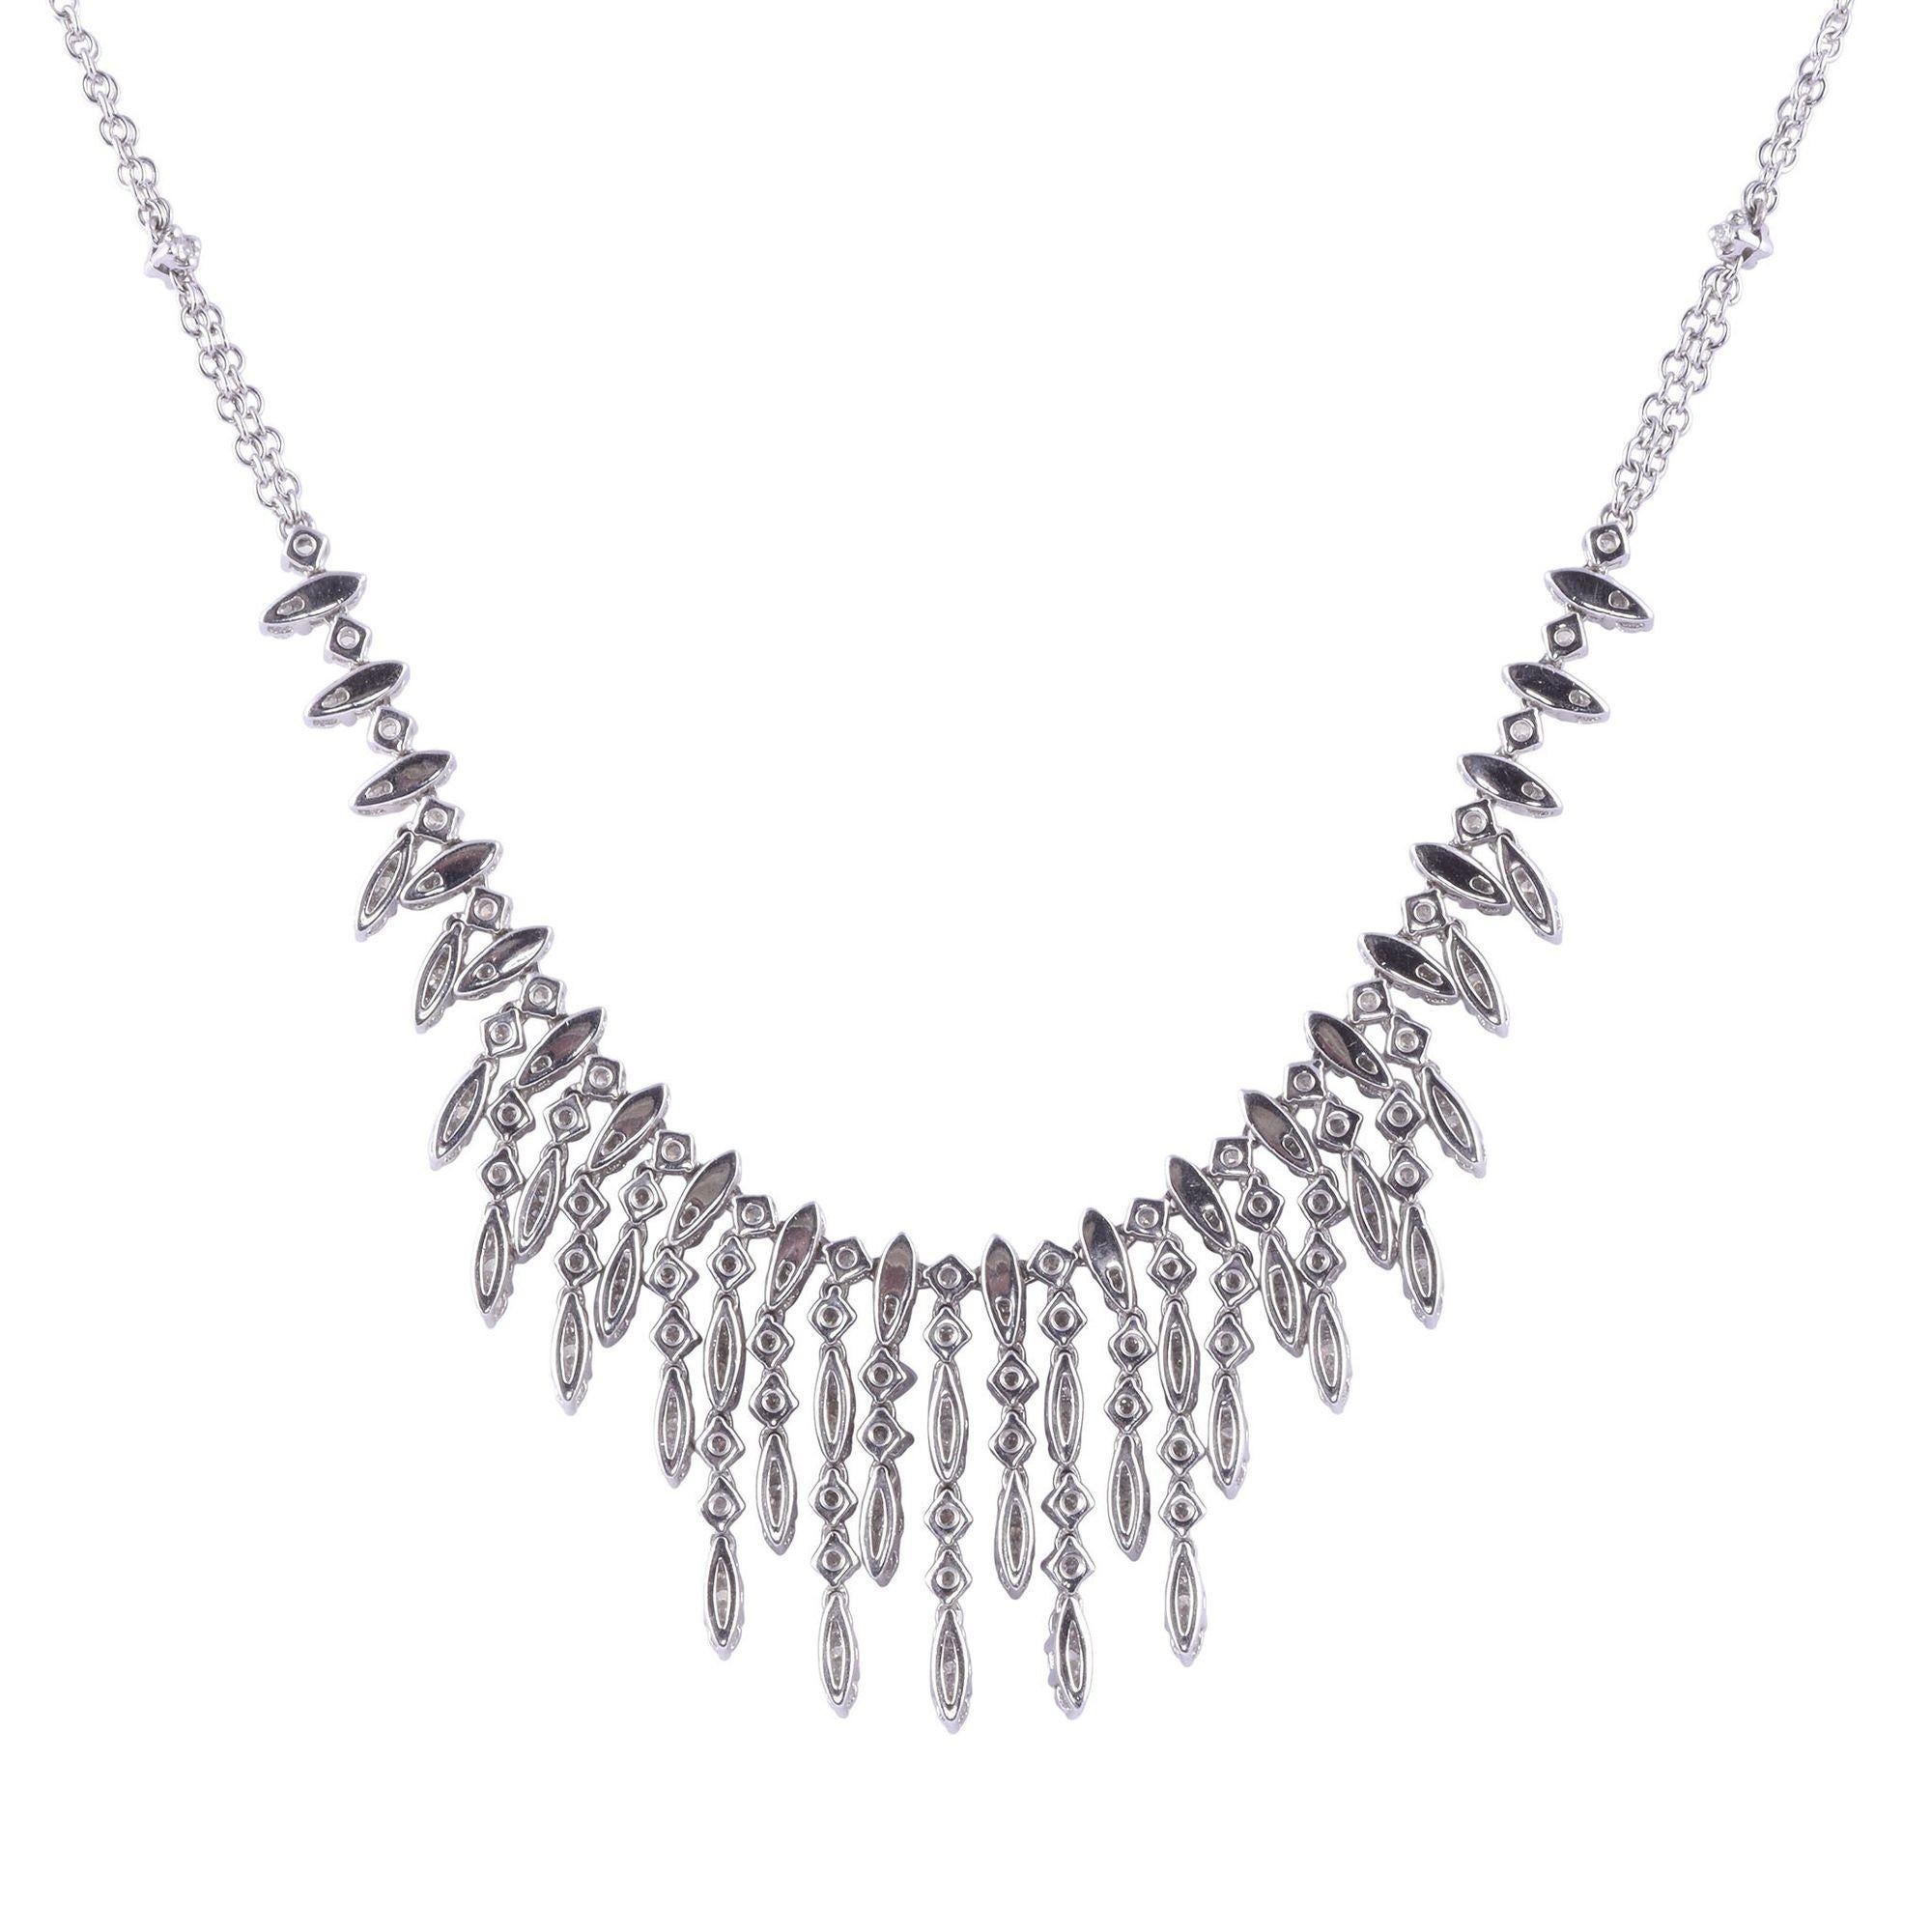 Estate 6 CTW diamond dangle necklace. This 18 karat white gold necklace features 230 round brilliant cut diamonds at 6.00 carat total weight with VS1-SI2 clarity and G-I color. Each link is hinged giving this necklace wonderful movement and the